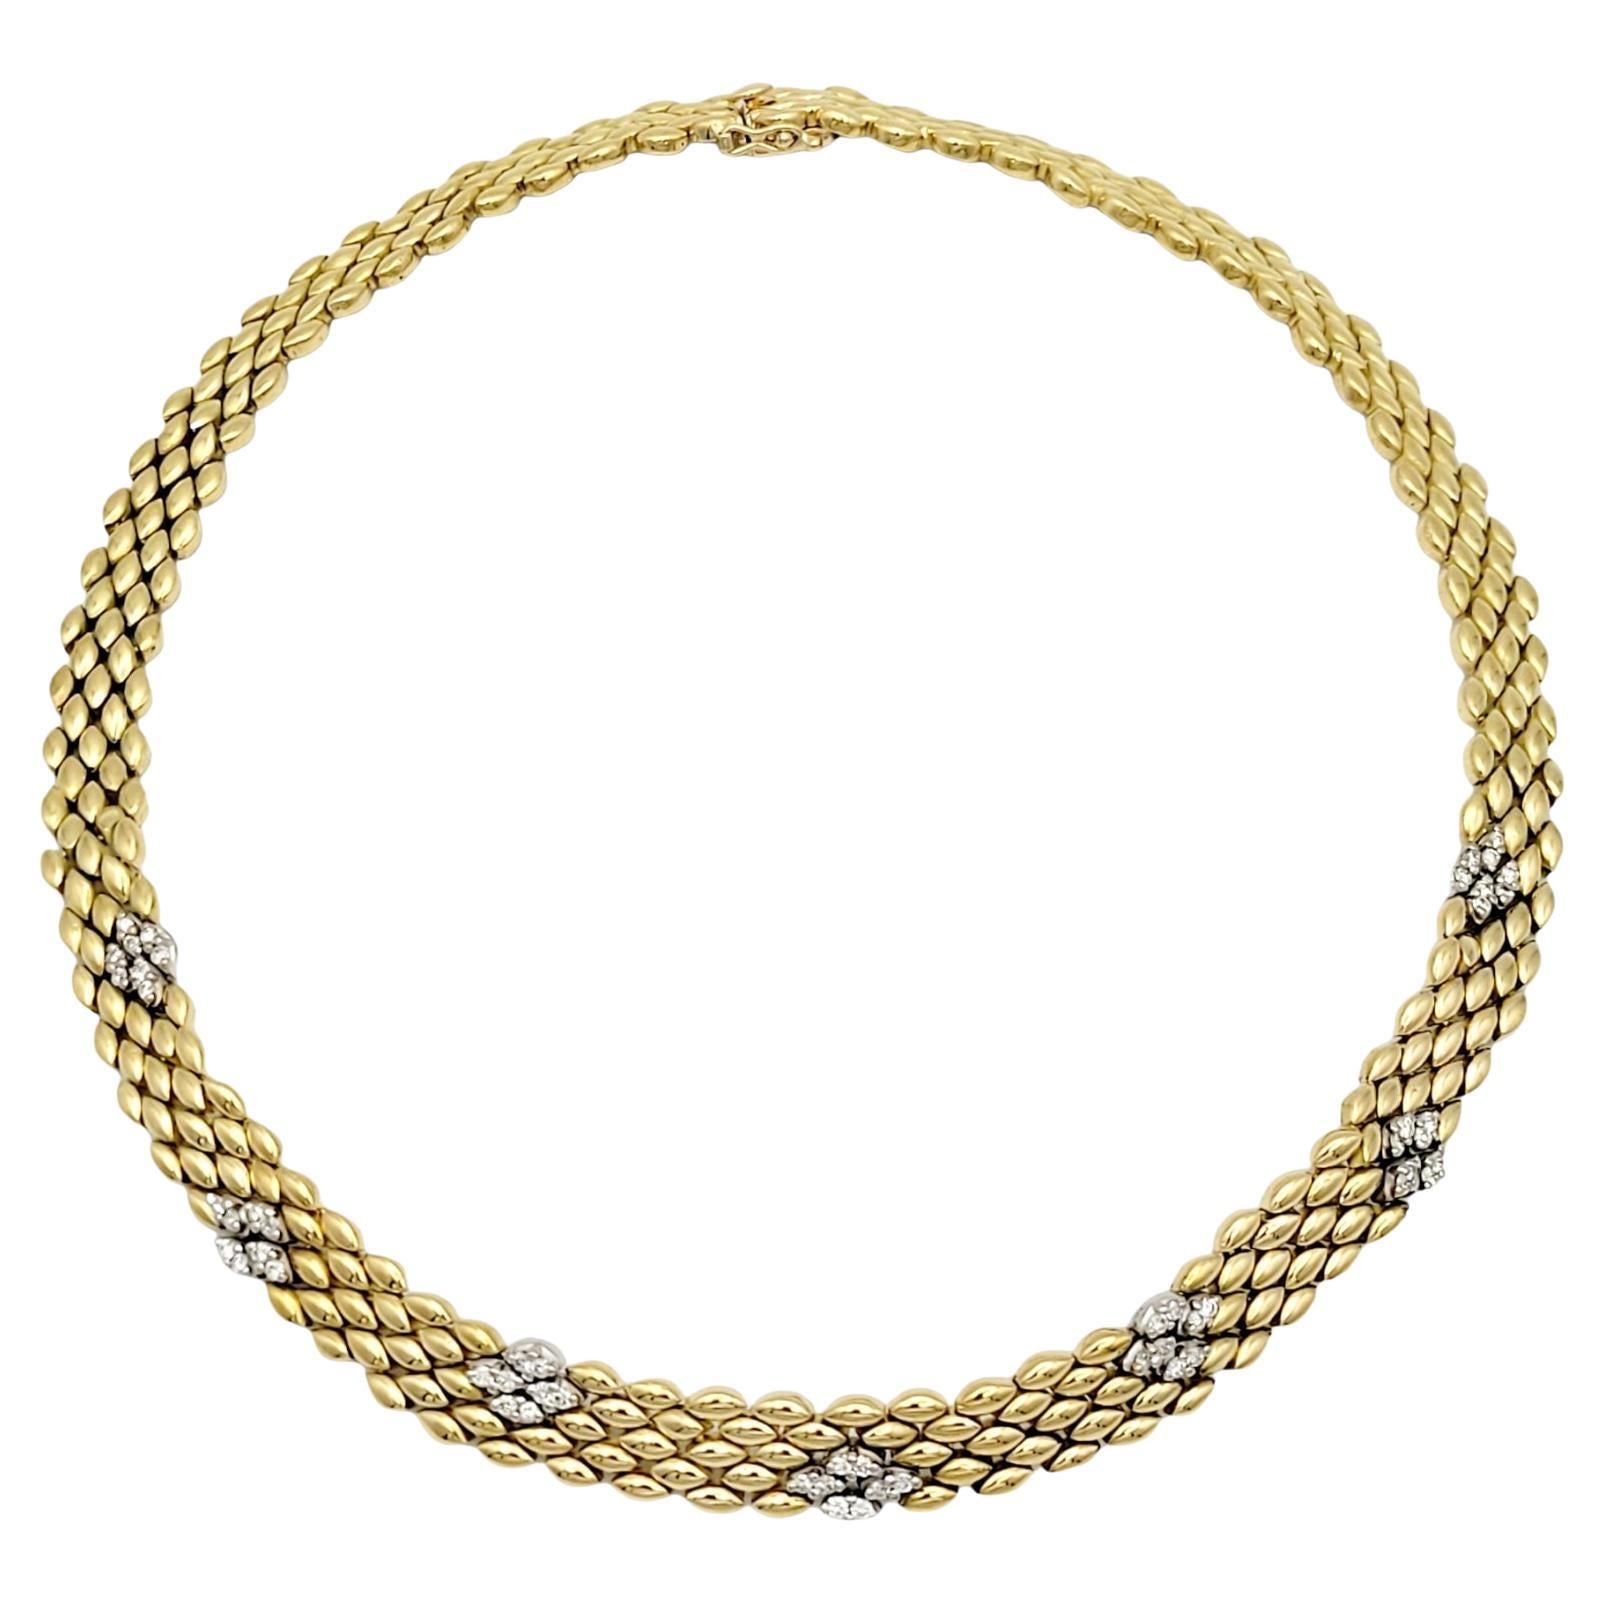 Diamond Panther Link Necklace in 18 Karat Yellow & White Gold Collar Style